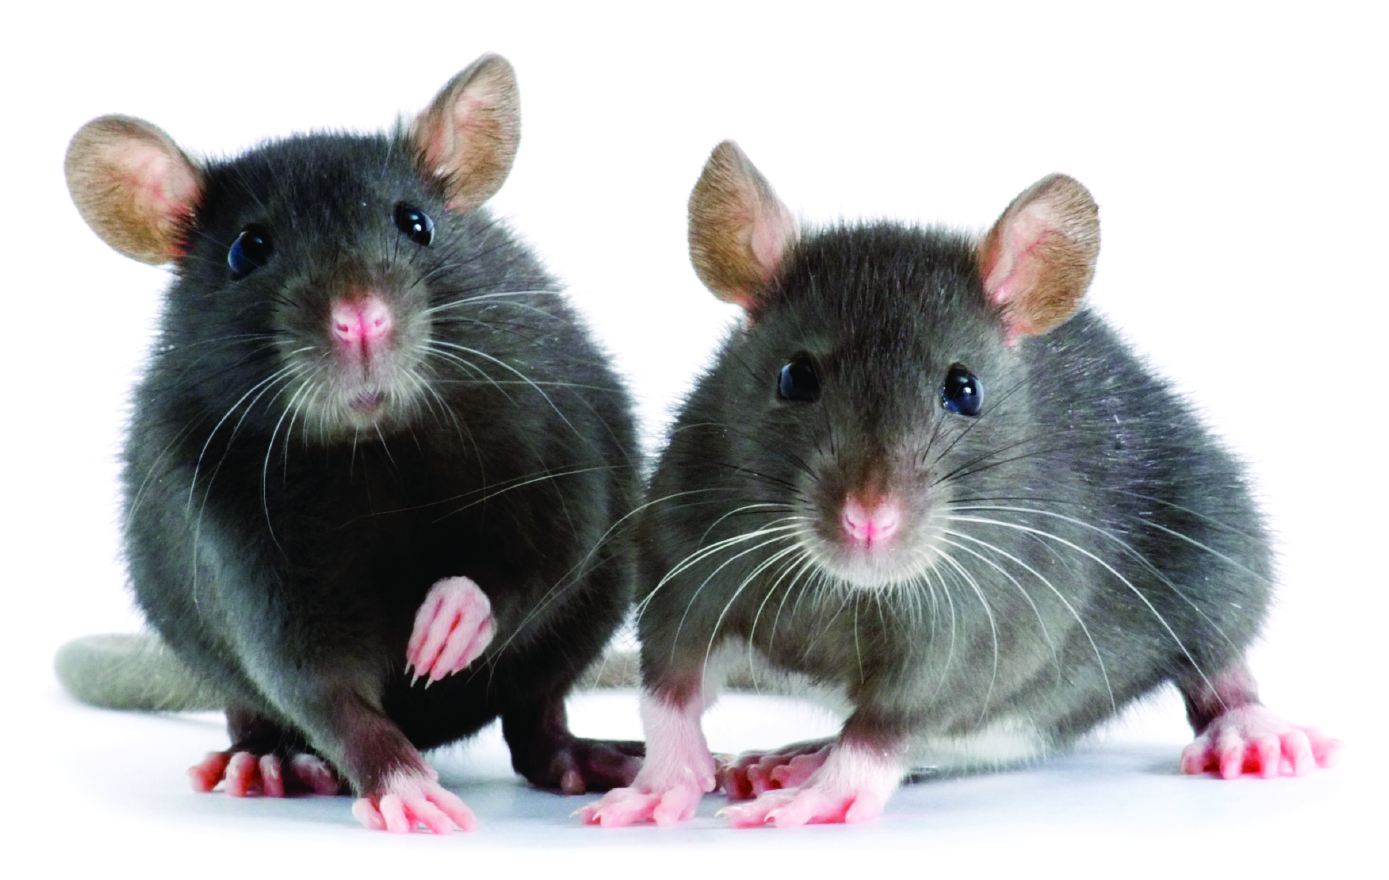 Protecting Your Family Against Diseases Carried by Mice and Rats￼